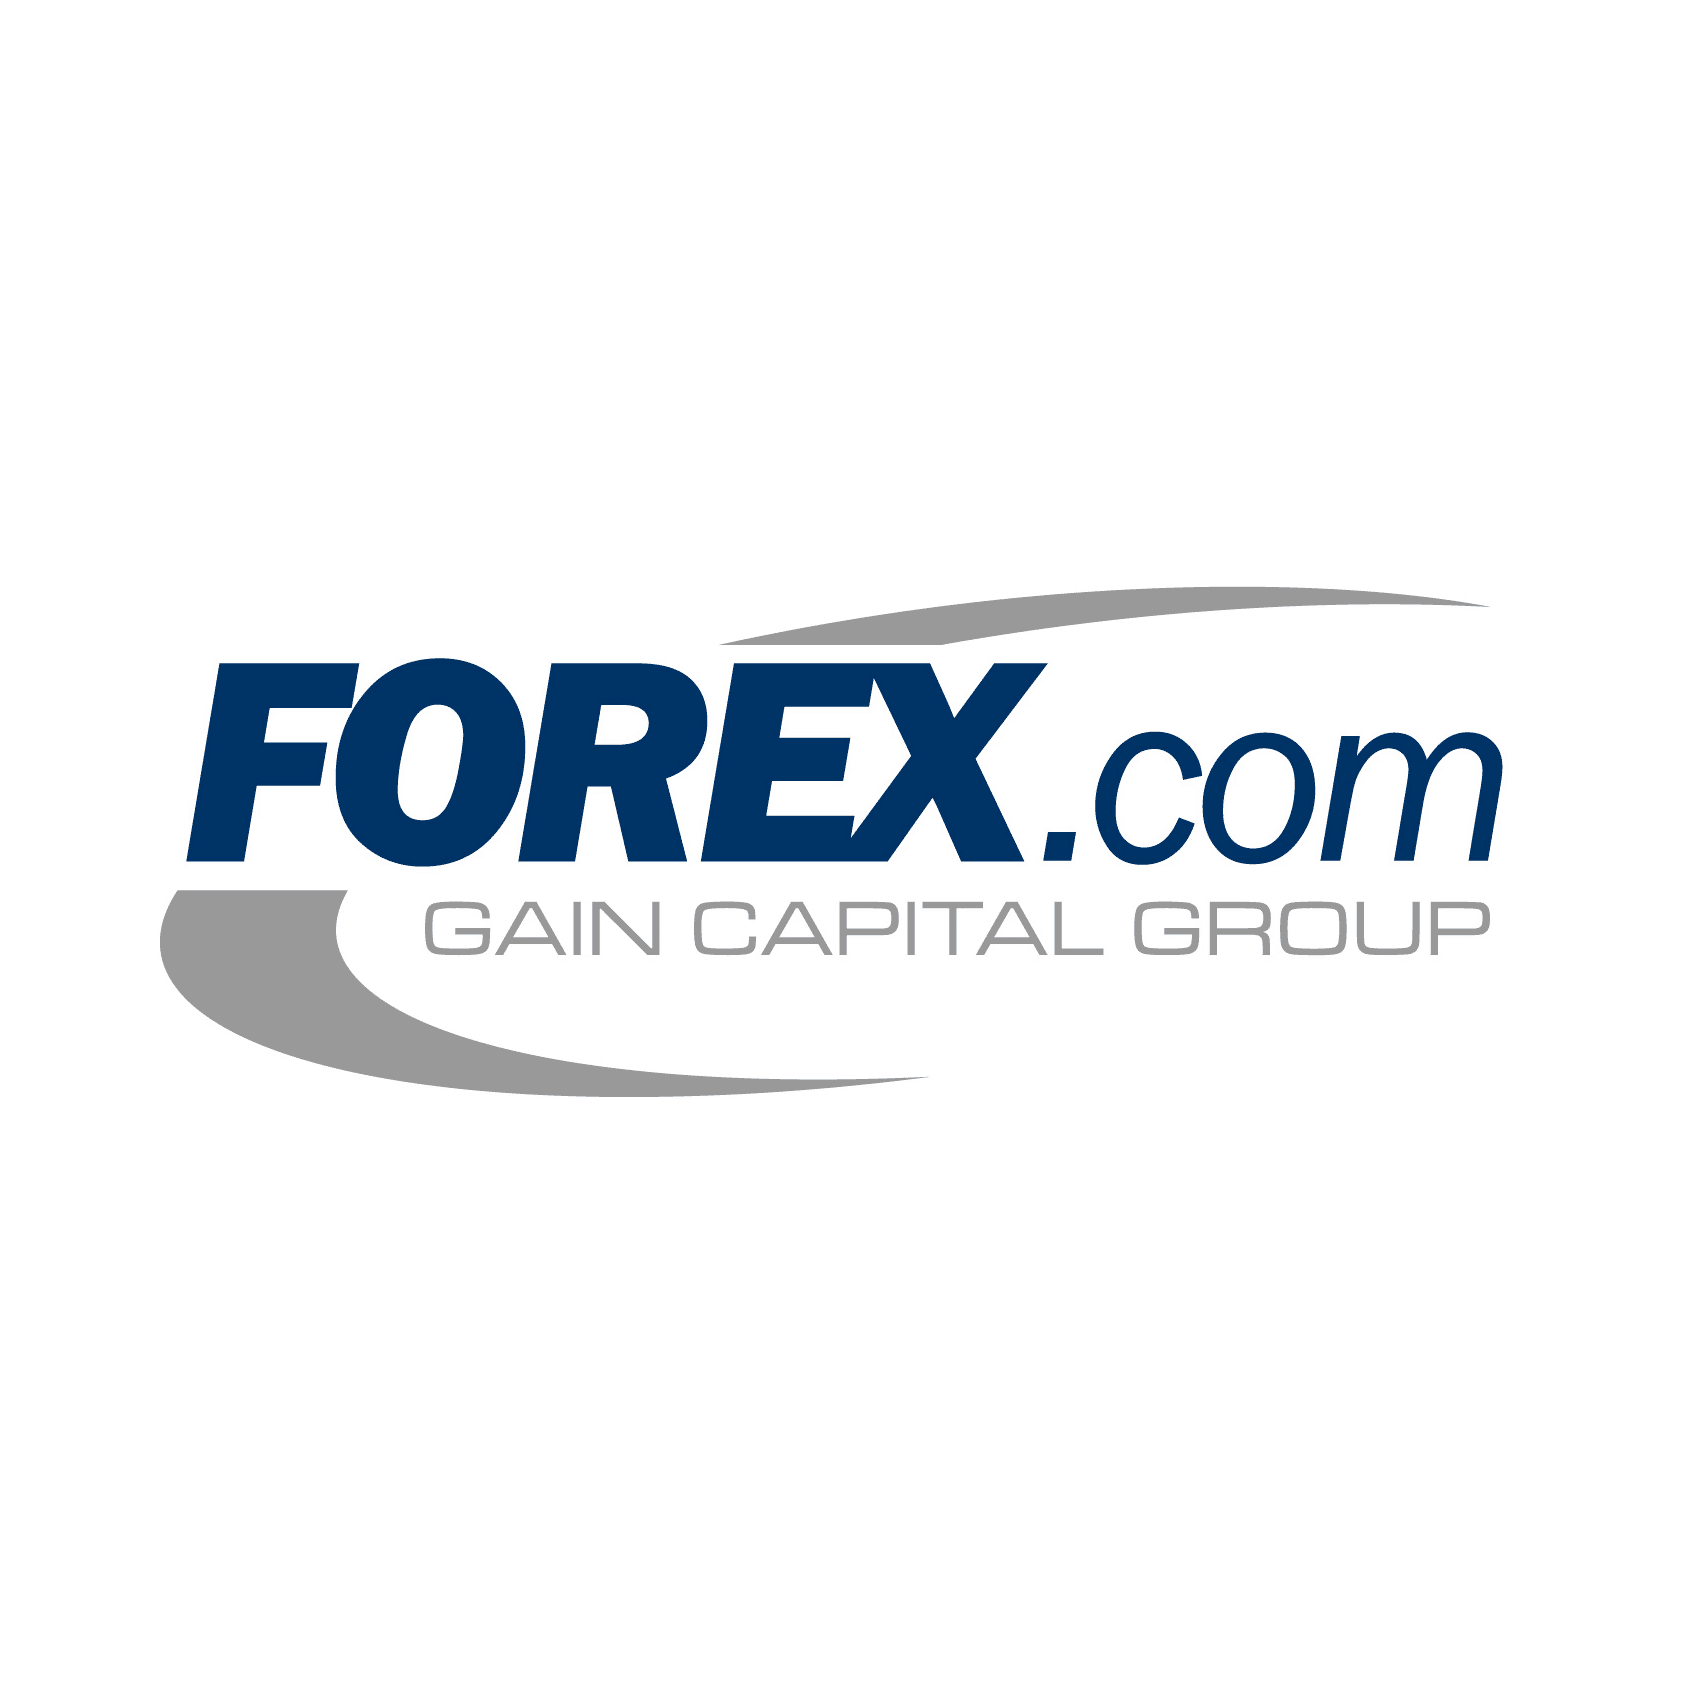 Forex.com Sets Out Possible Margin Changes Ahead of US Election